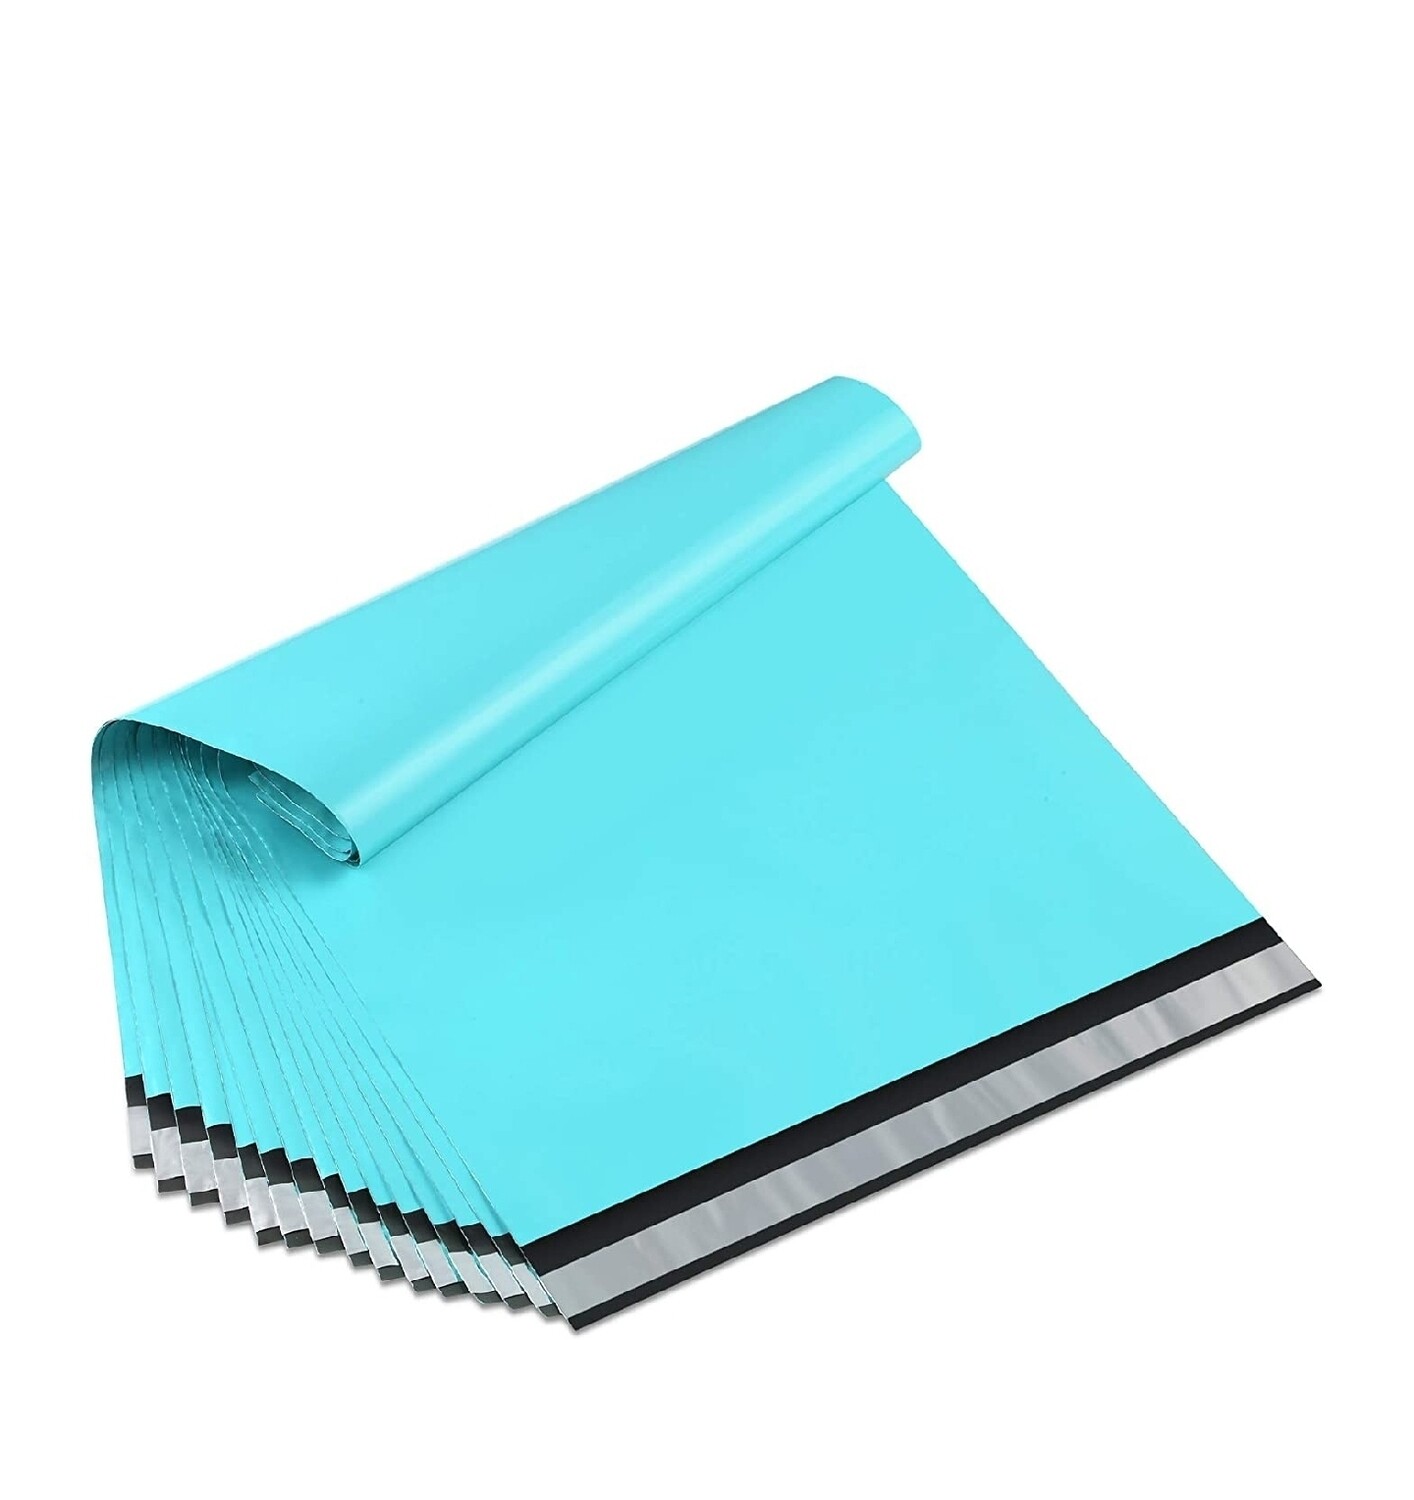 14.5x19 Inch Teal Poly Mailers 